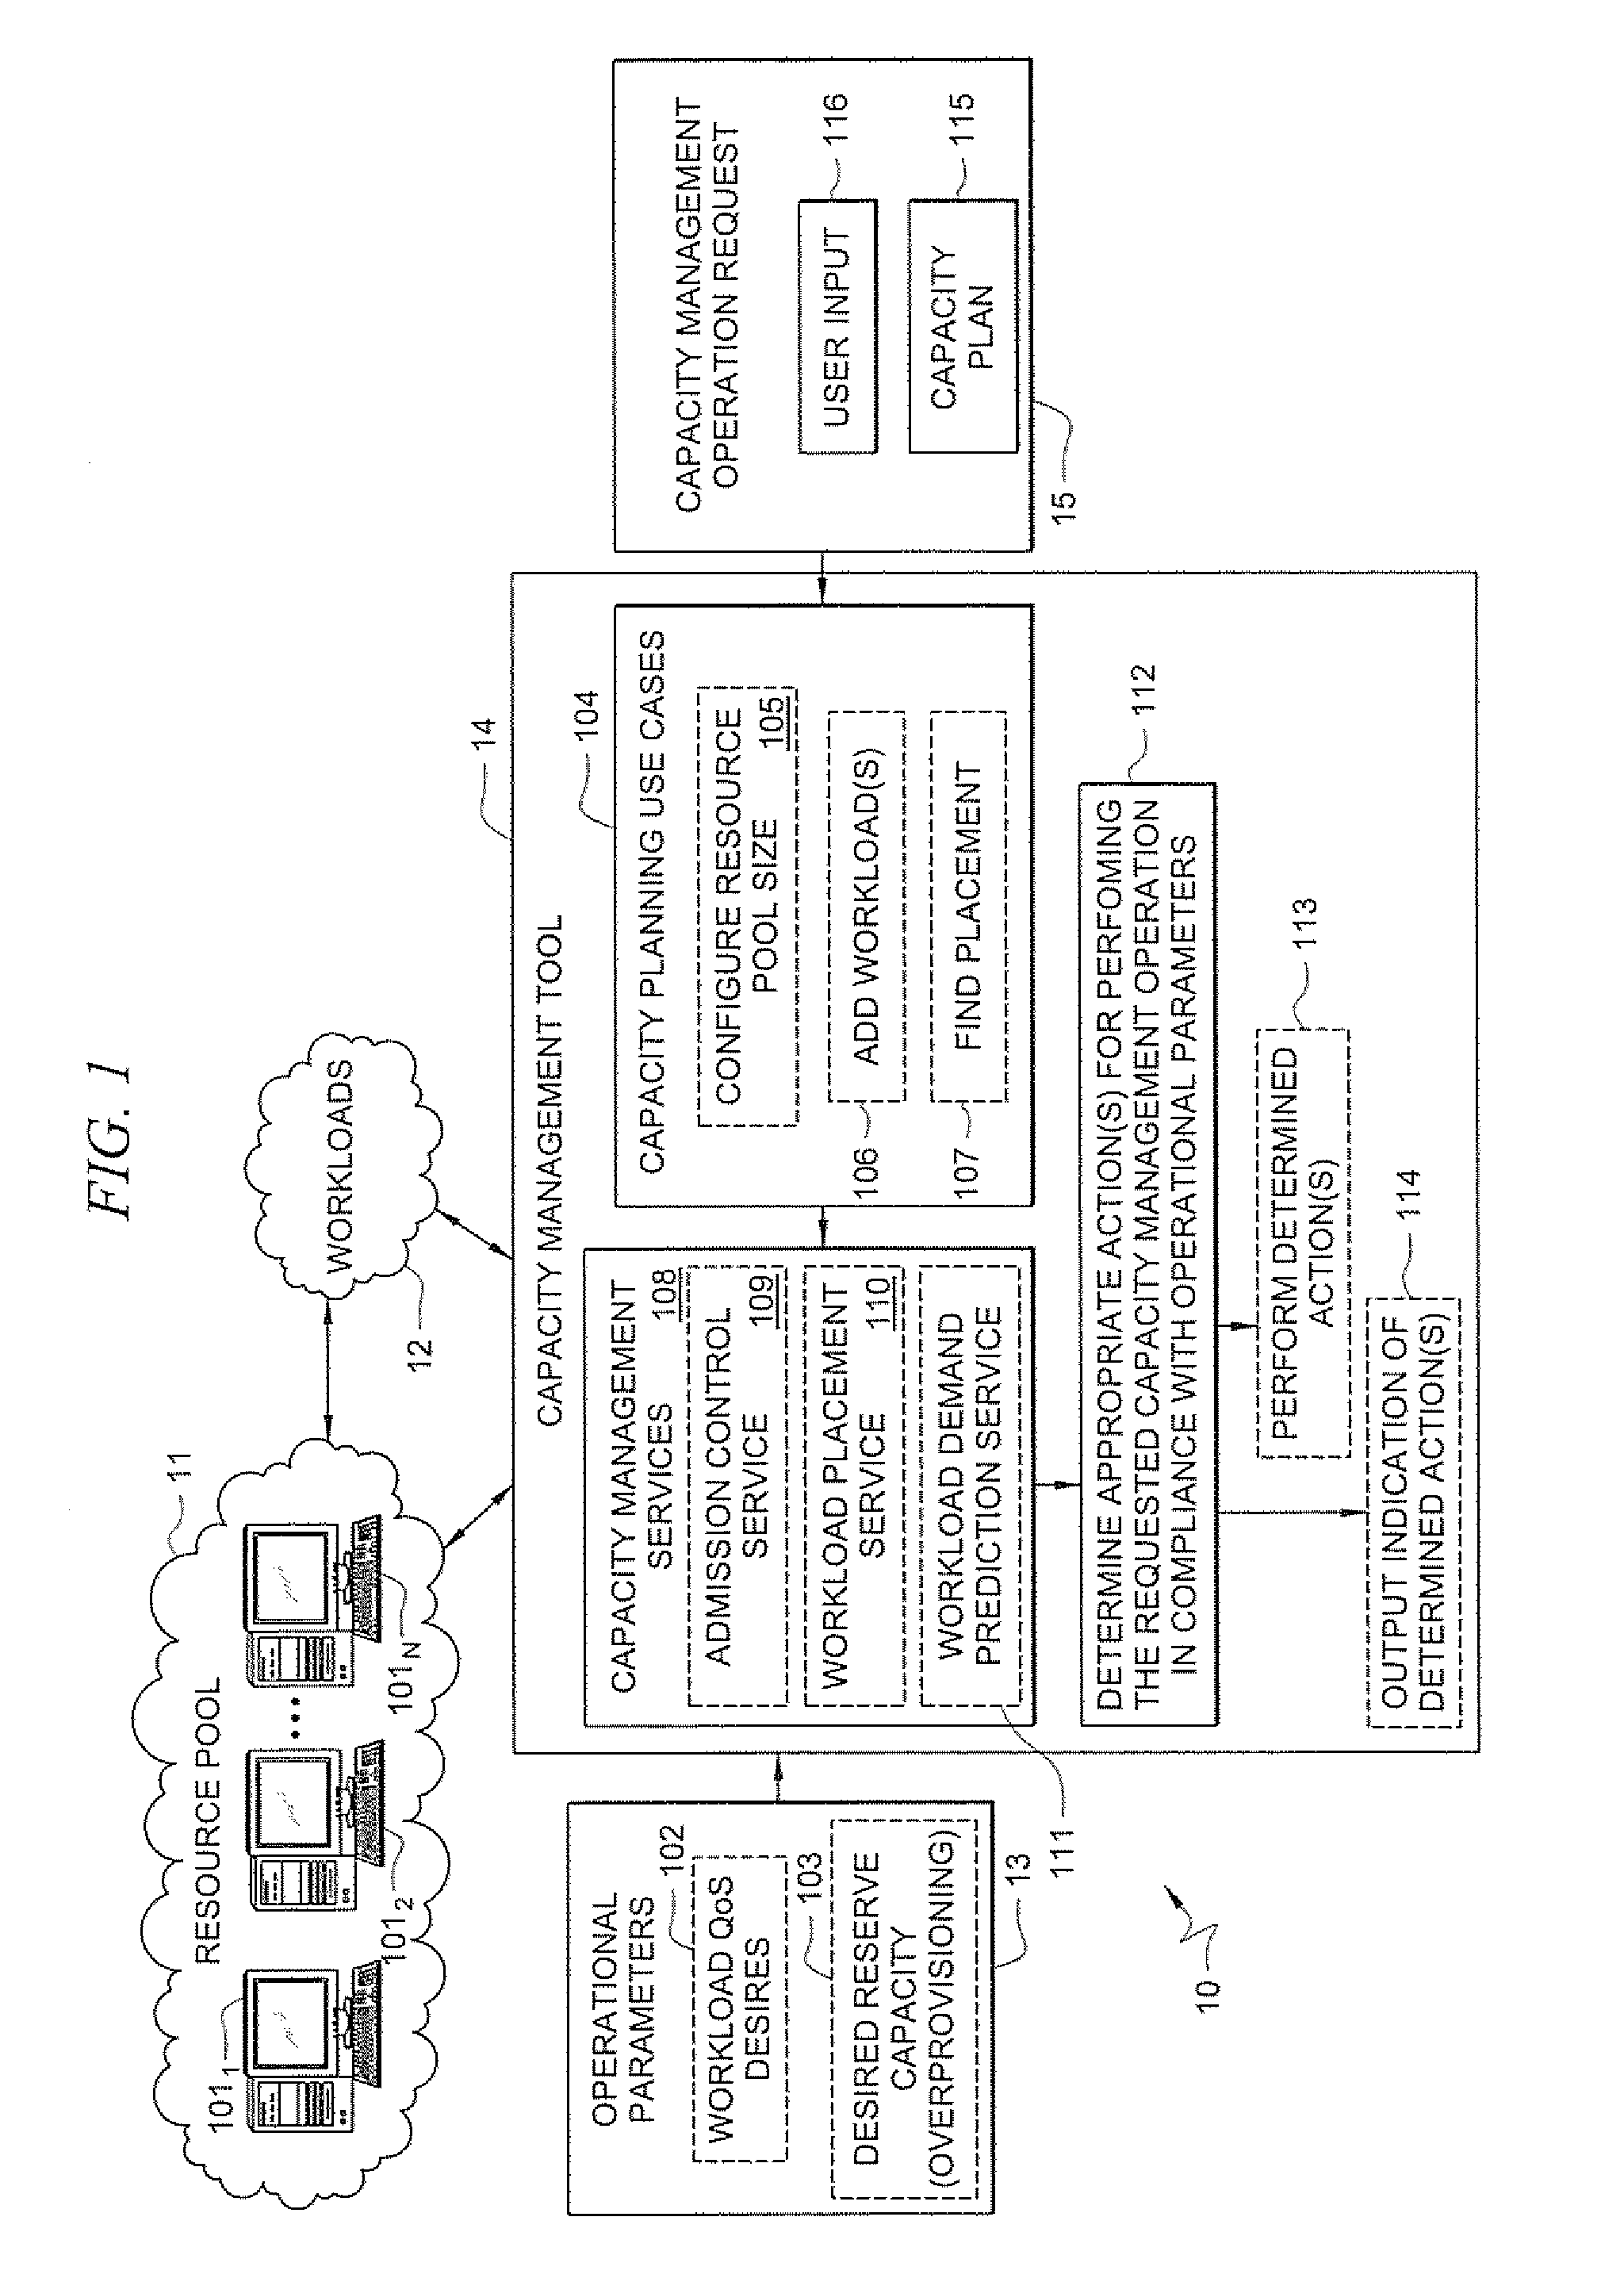 Systems and methods for providing capacity management of resource pools for servicing workloads